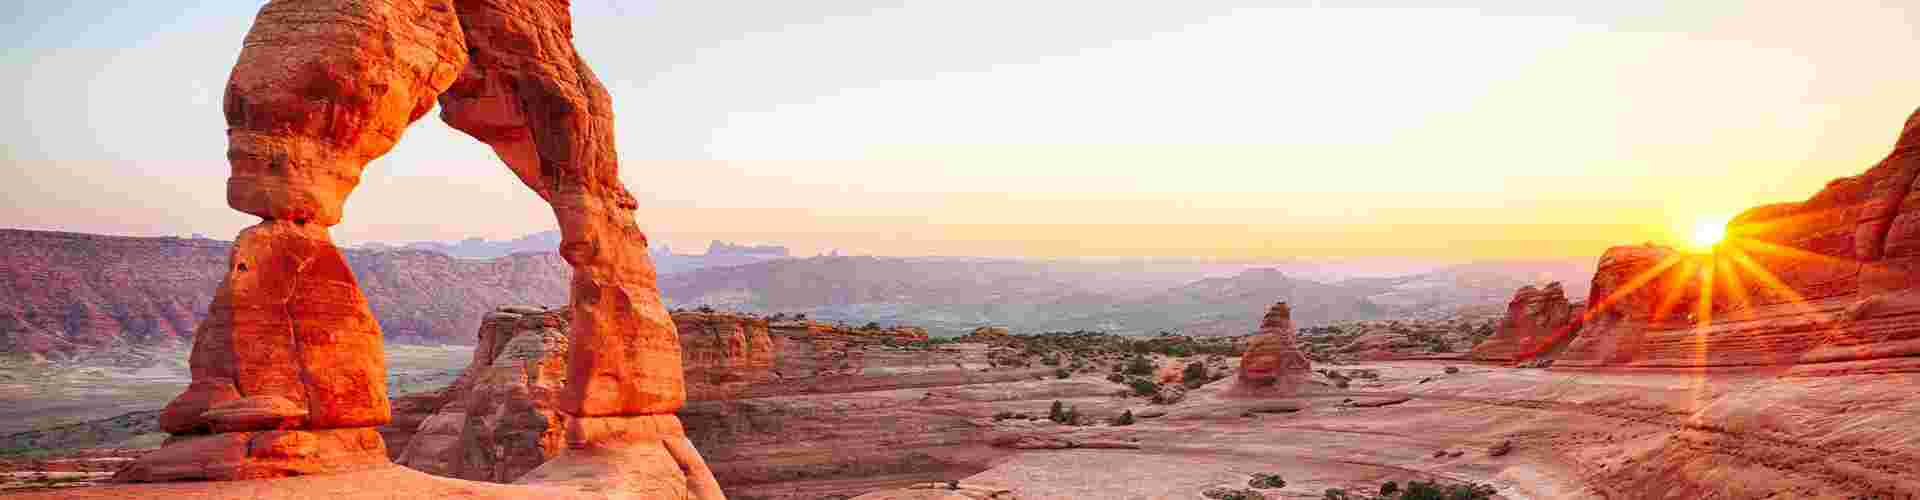 Sunset over Moab near Arches National Park